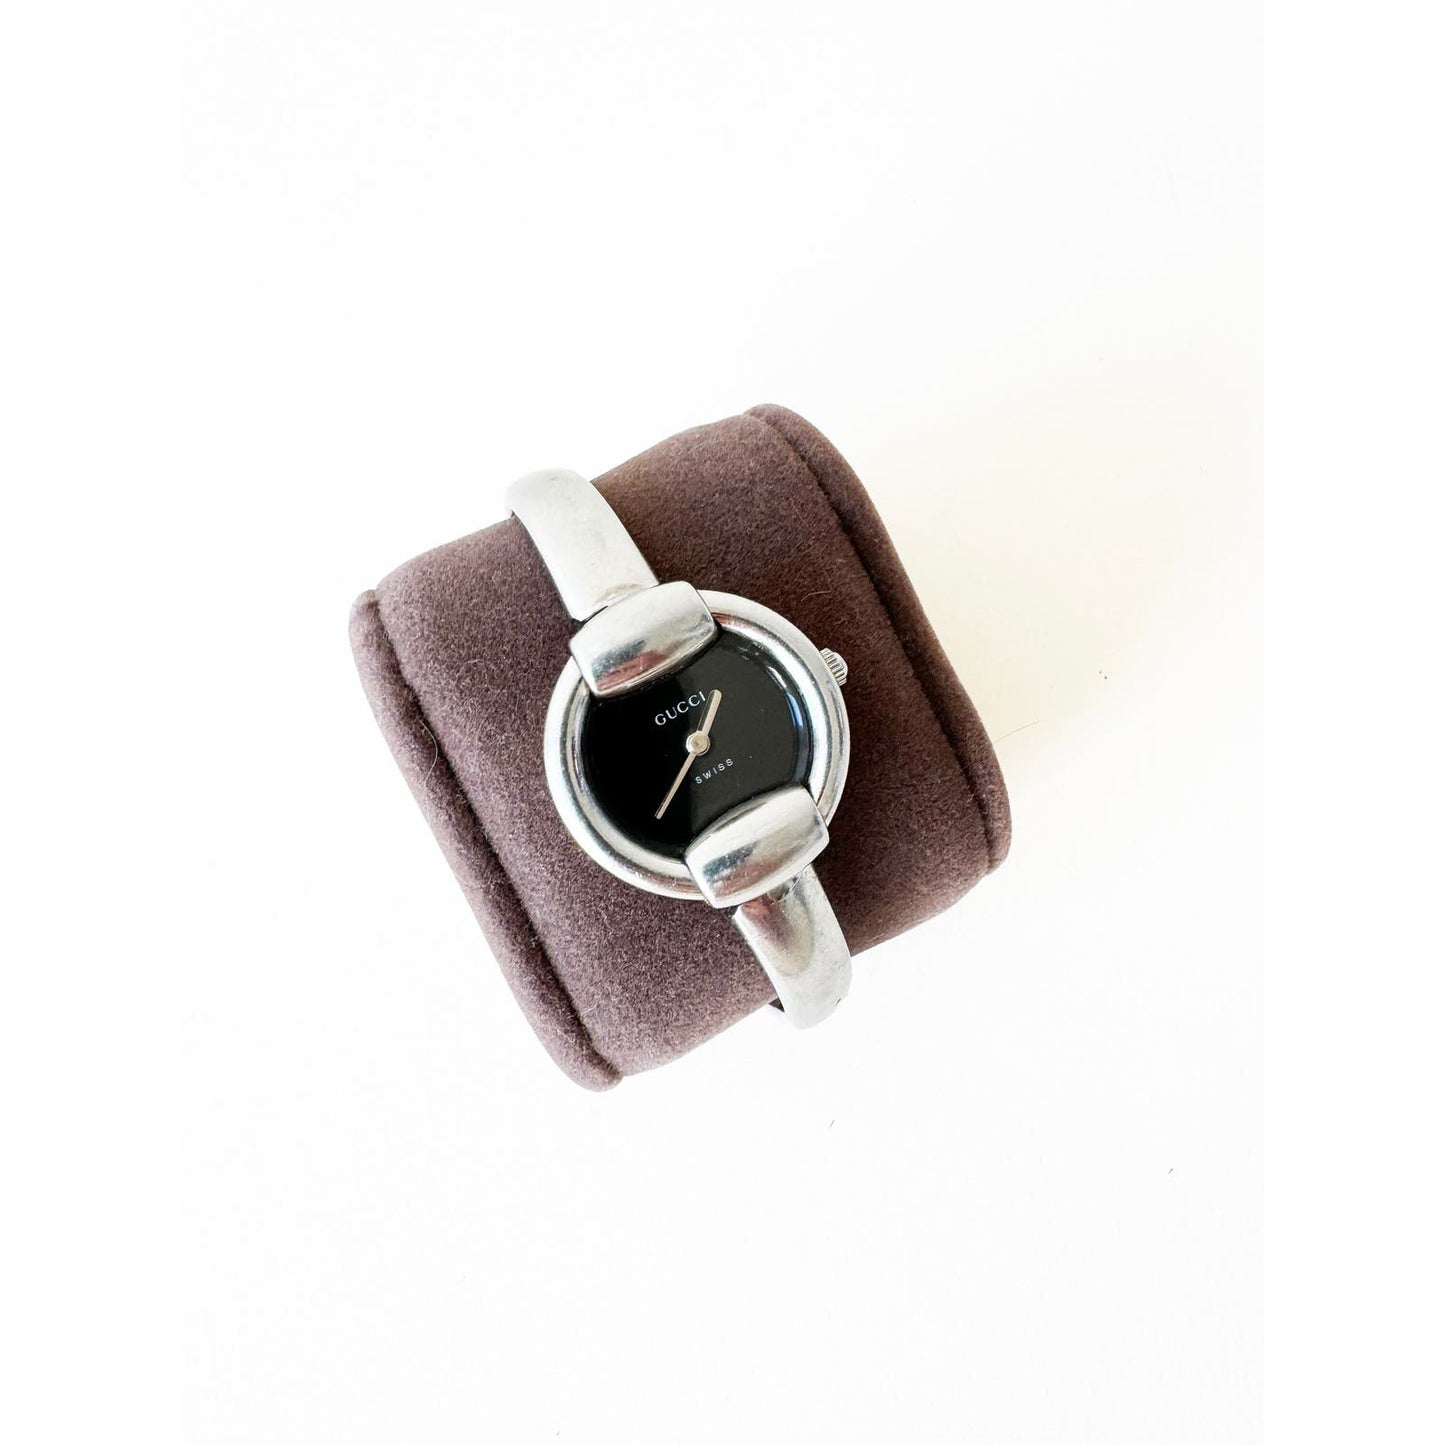 Vintage Gucci Silver Bracelet Watch with Black Circular Face